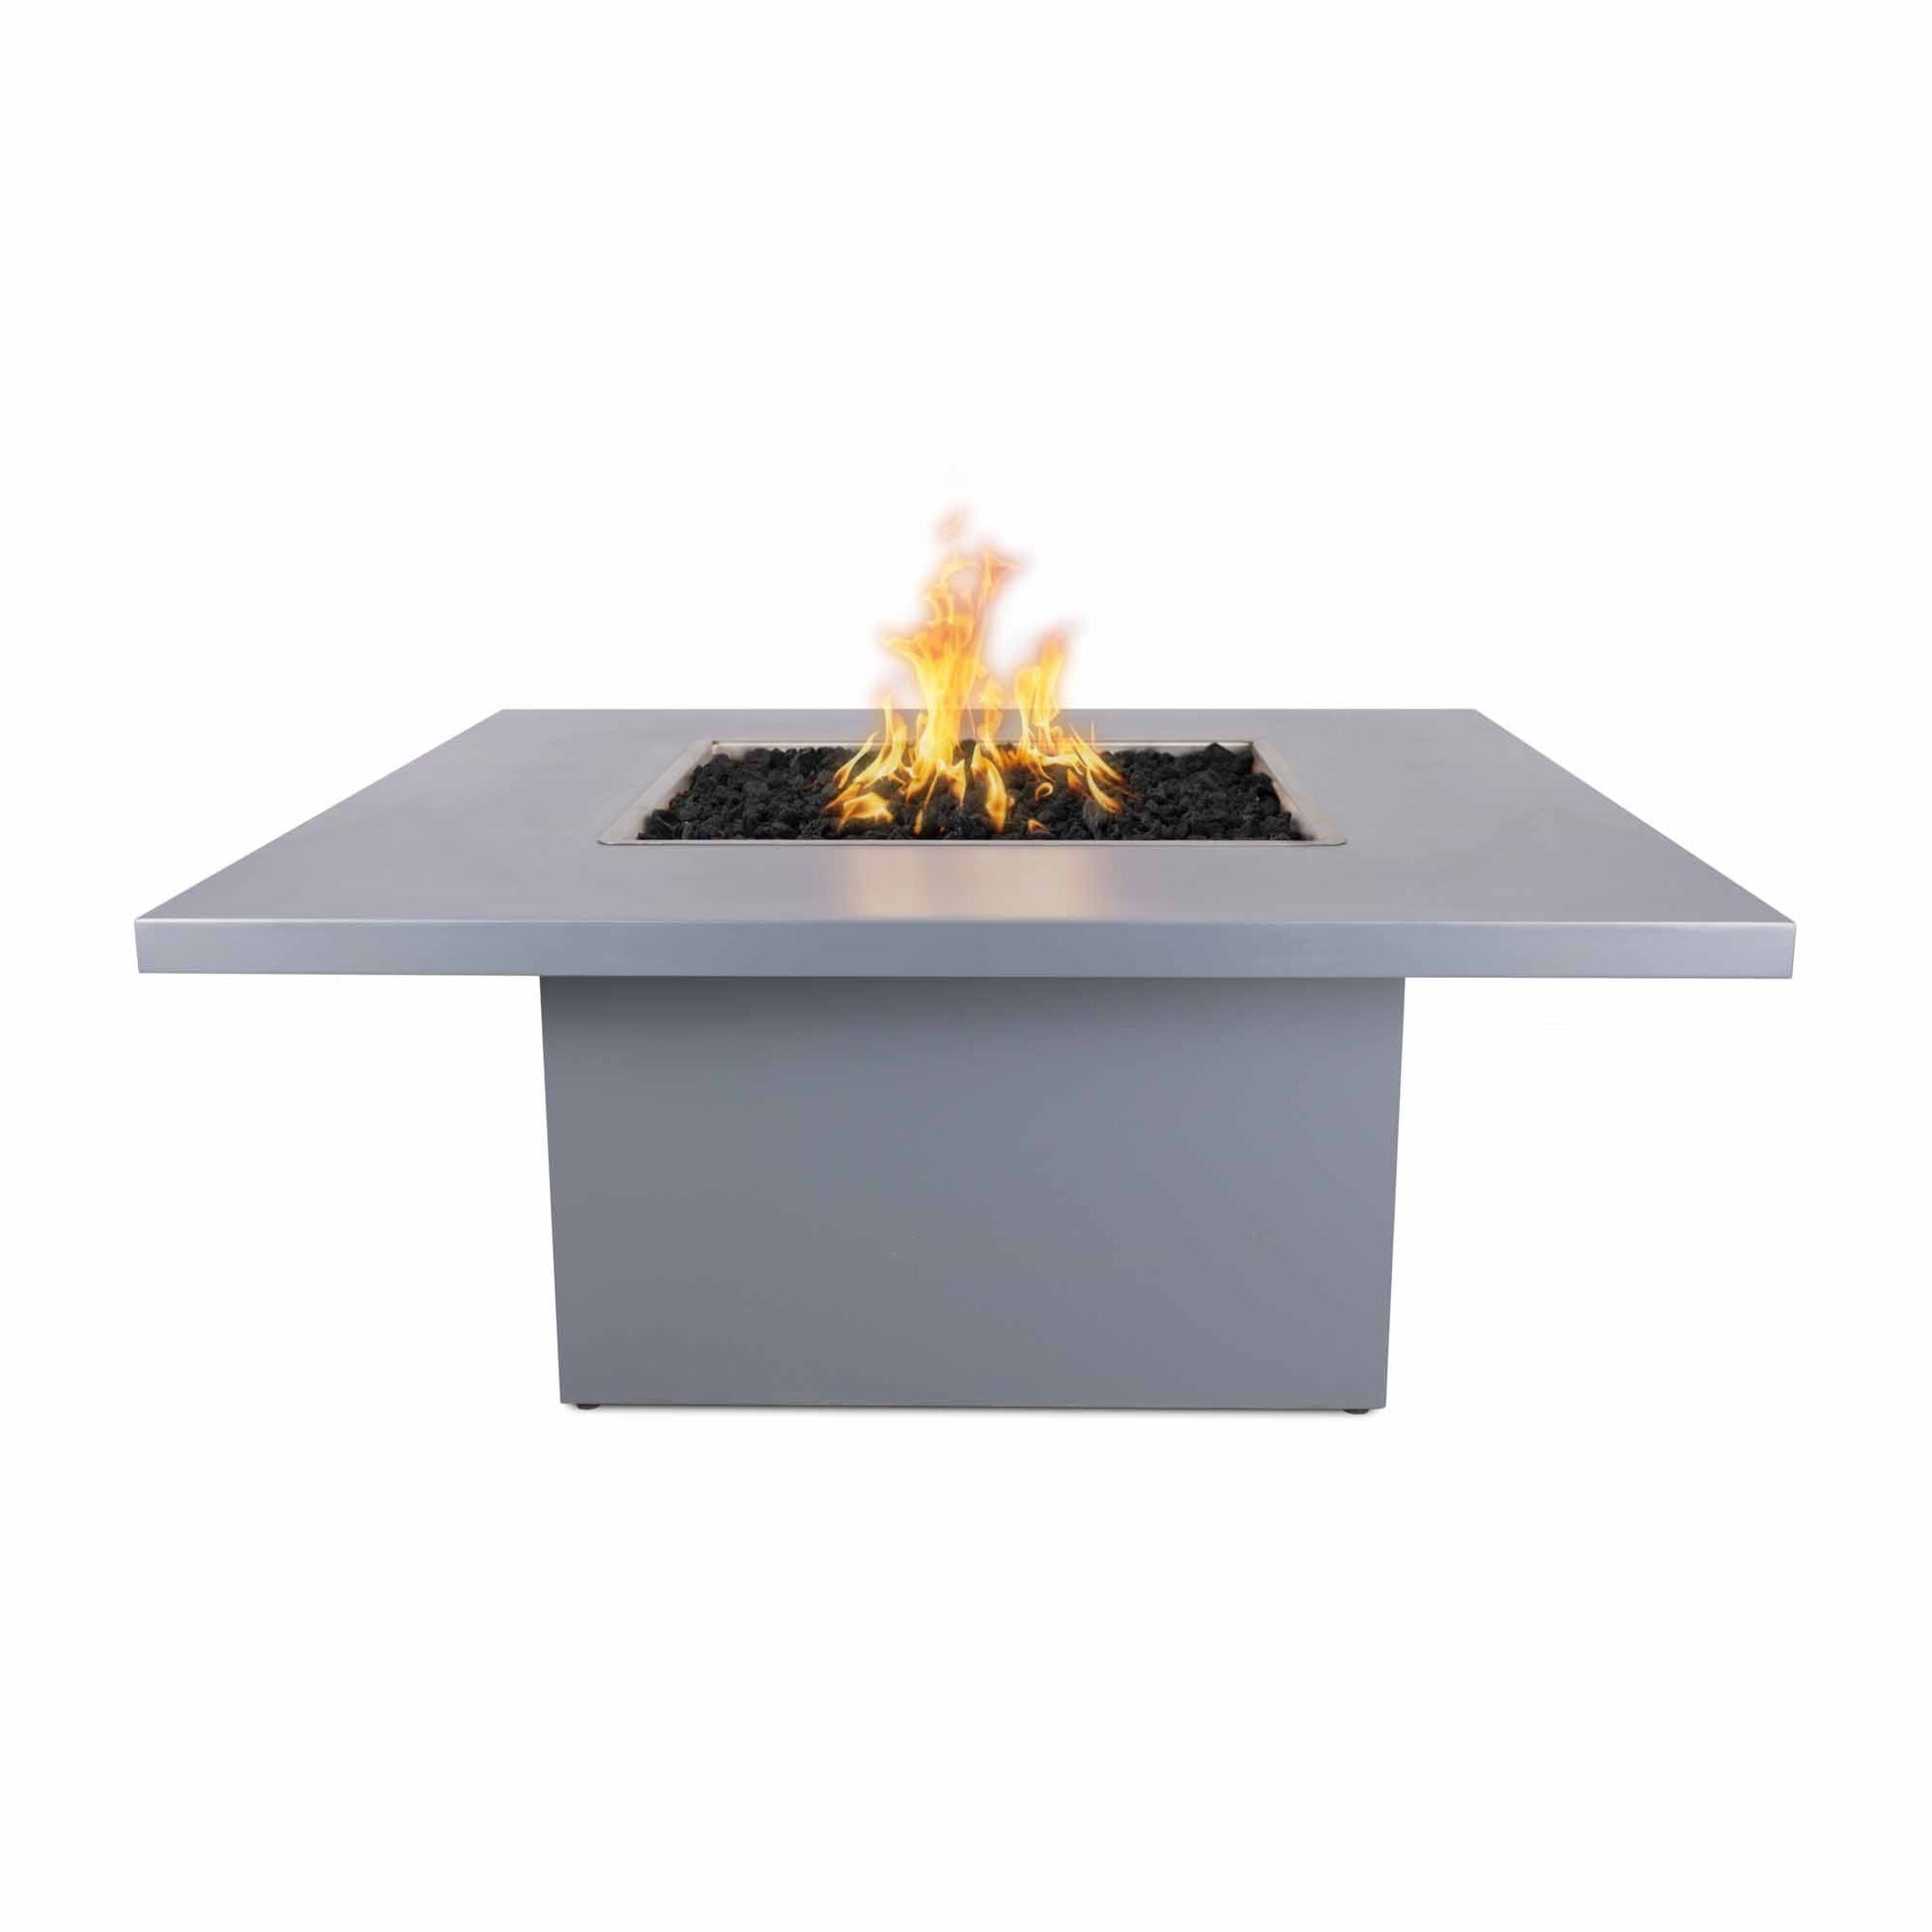 The Outdoor Plus Square Bella 36" Hammered Copper Liquid Propane Fire Pit with Match Lit with Flame Sense Ignition